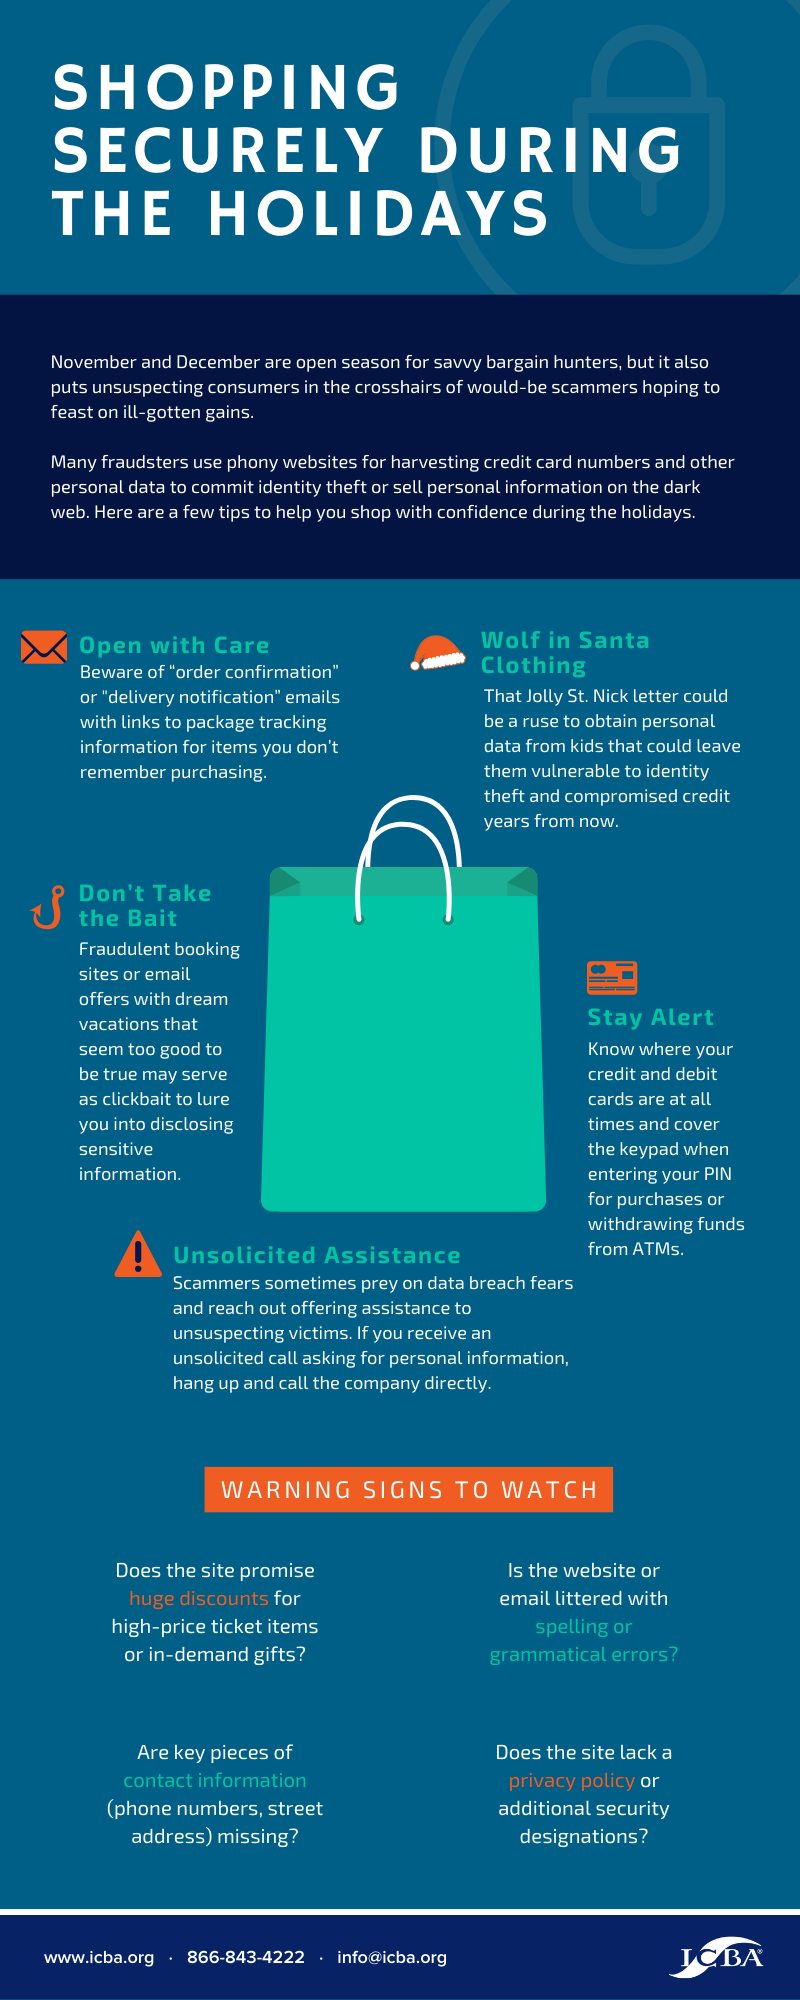 Shopping Securely During the Holidays